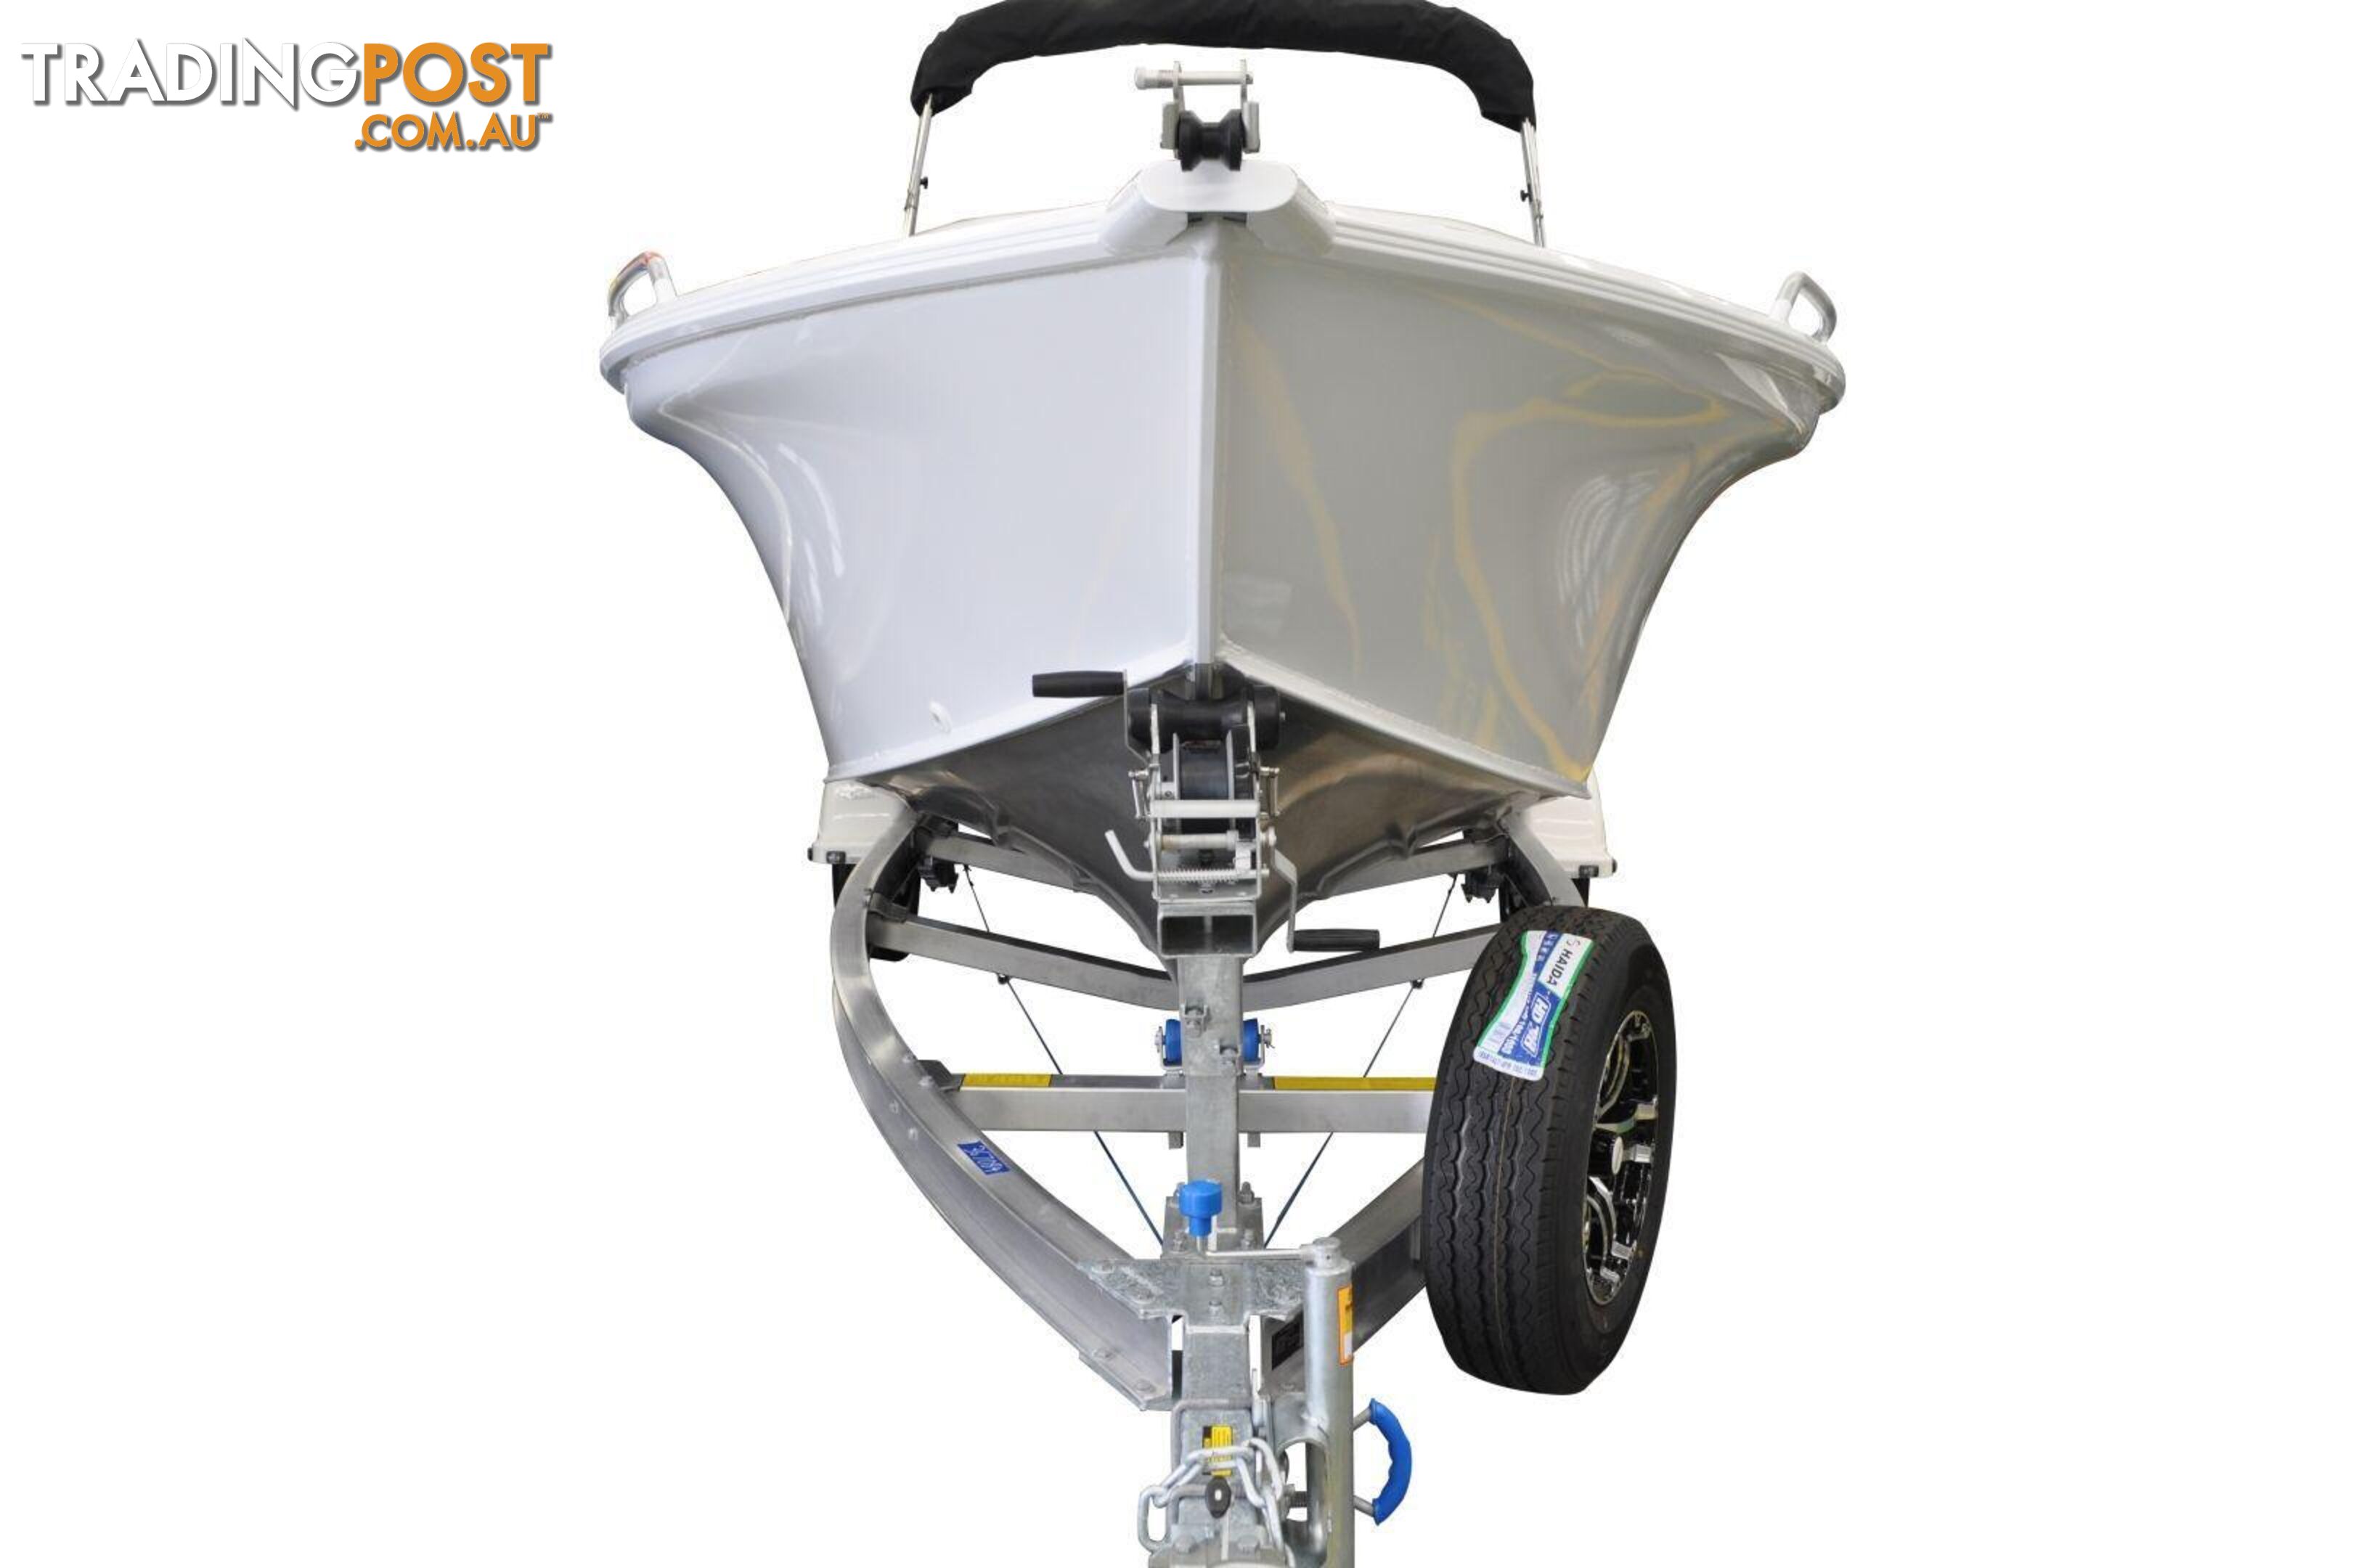 Quintrex 540 Cruiseabout + Yamaha F130hp 4-Stroke - Pack 3 for sale online prices